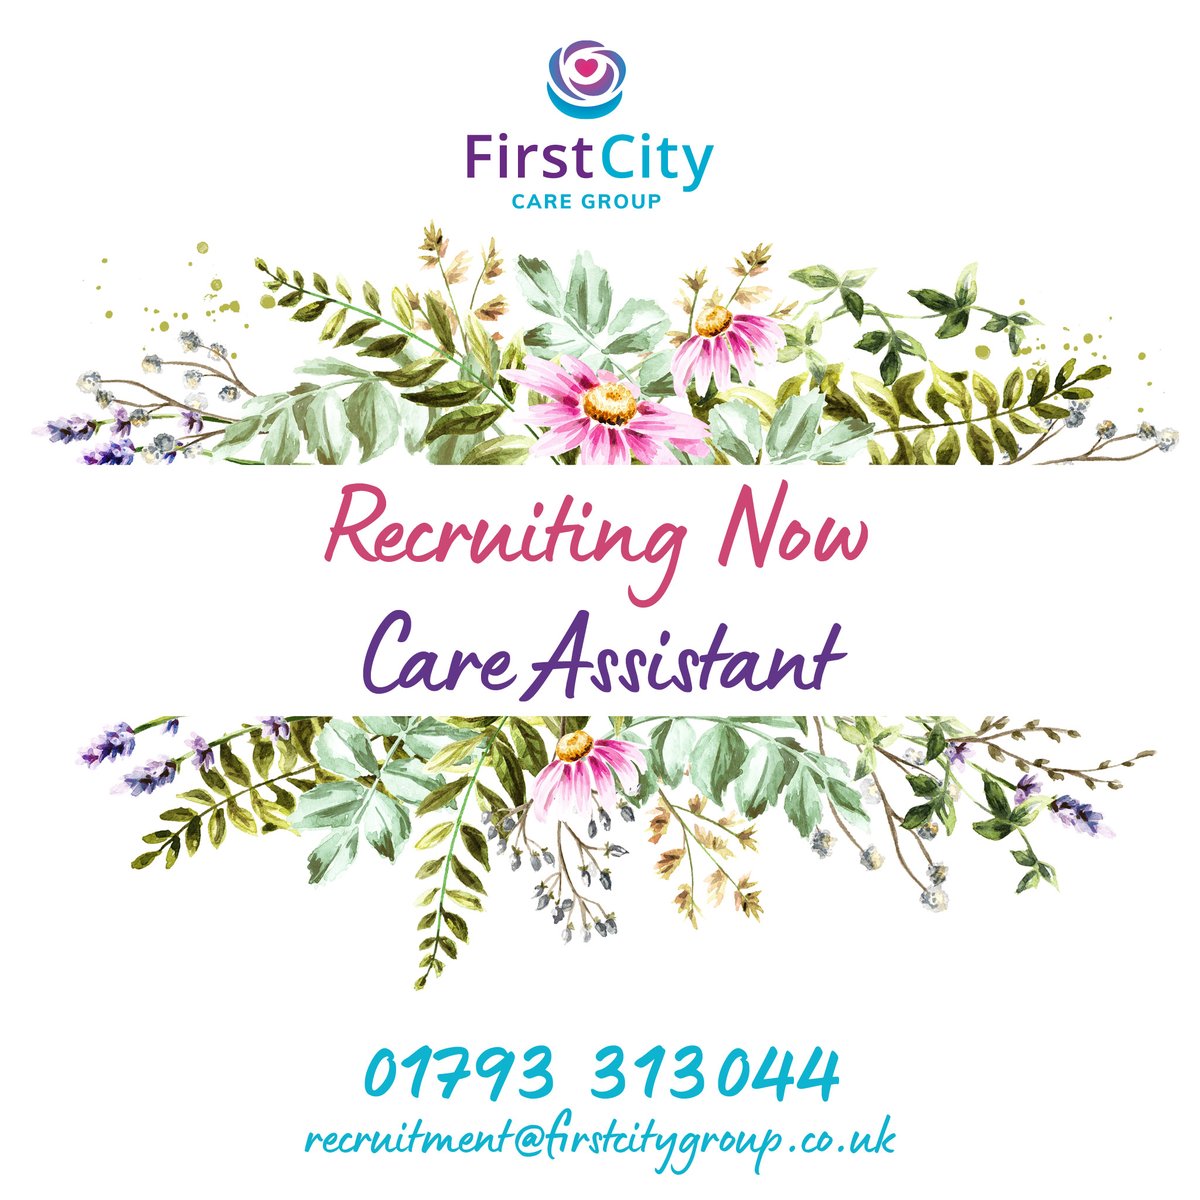 🐝 Excellent in-house training
🐞 Full-Time/Part-Time/Bank positions available
🐛 Flexible hours to work around your current commitments

🌺 01793 313044
🌸 recruitment@firstcitygroup.co.uk
🌻 firstcitynursing.co.uk/jobs/details/s…

#recruitingnow #readytowork #swindonjobs #carework #applynow